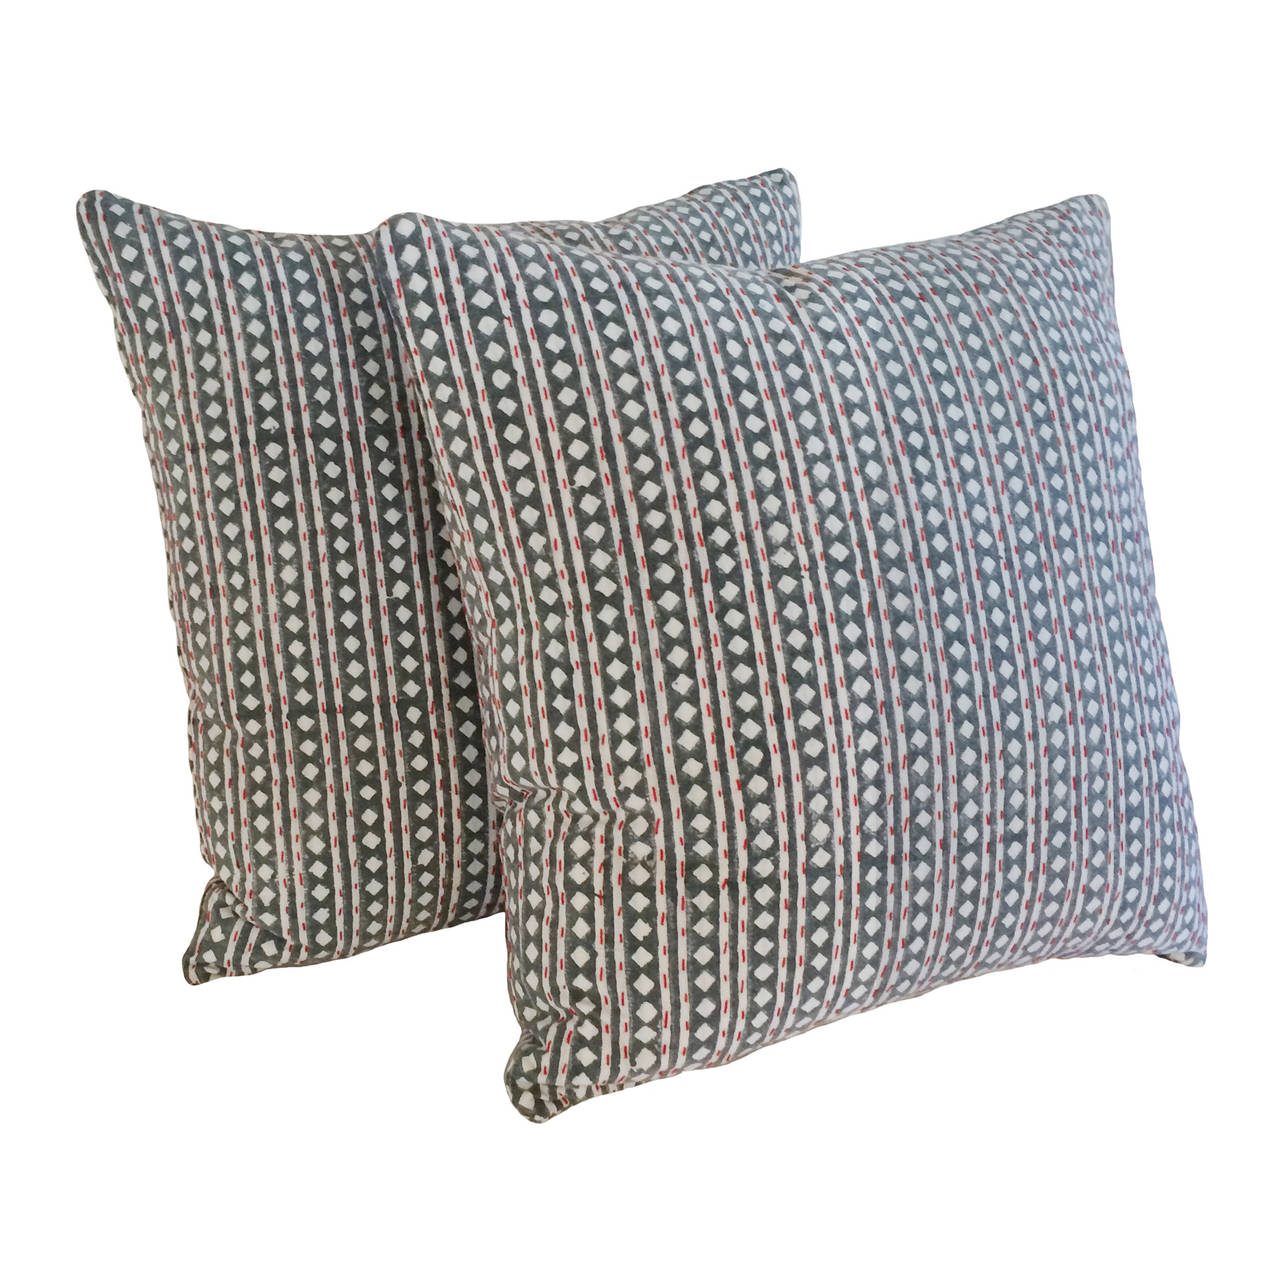 A pair of vintage Kantha down pillows; geometric diamond pattern; pale blue green on white background with thin red chain stitch on both sides, 19th century.